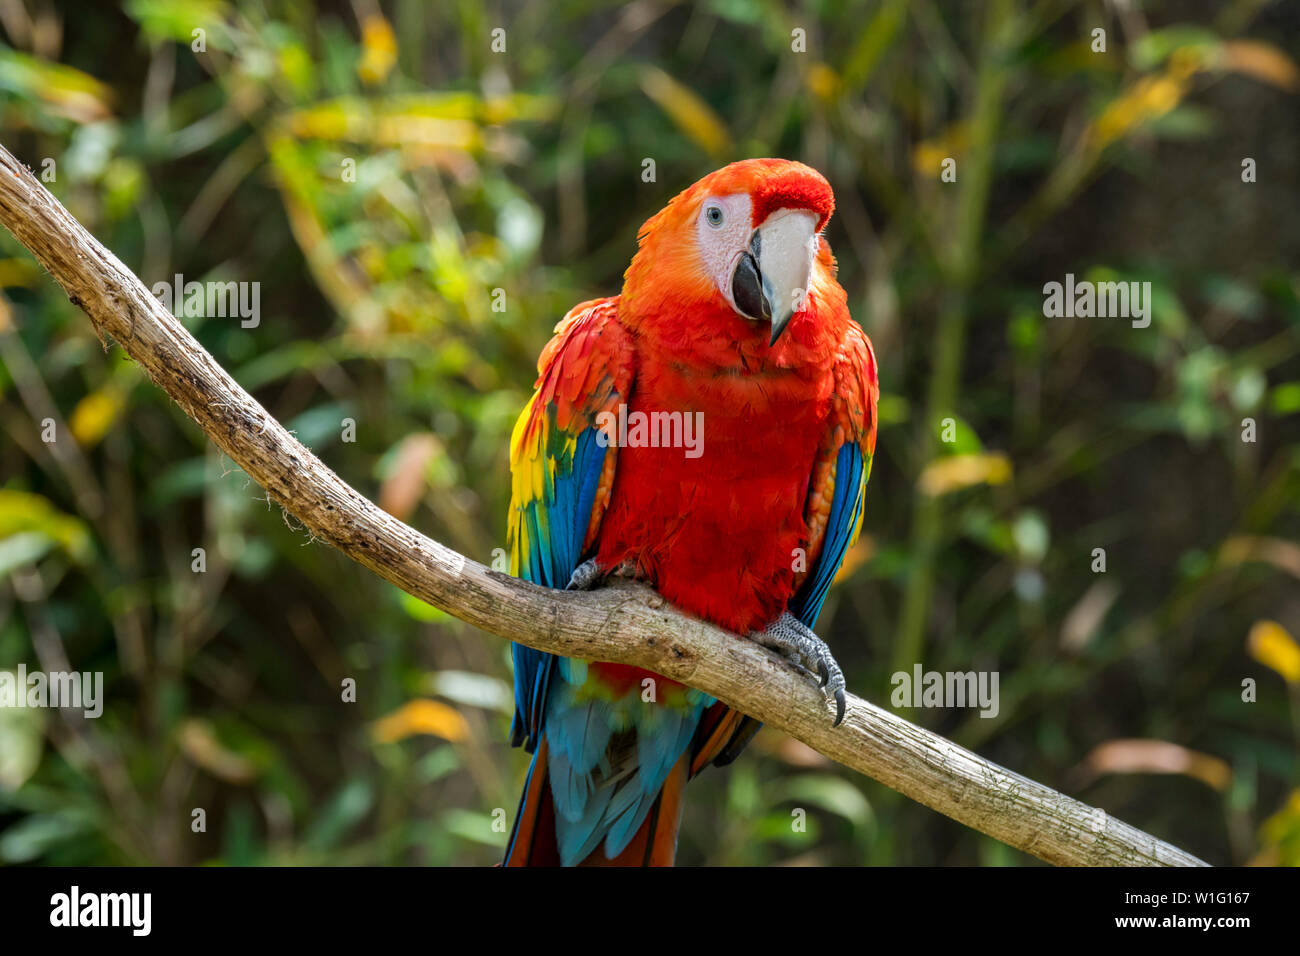 Scarlet macaw (Ara macao) perched in tree, native to forests of tropical Central and South America Stock Photo